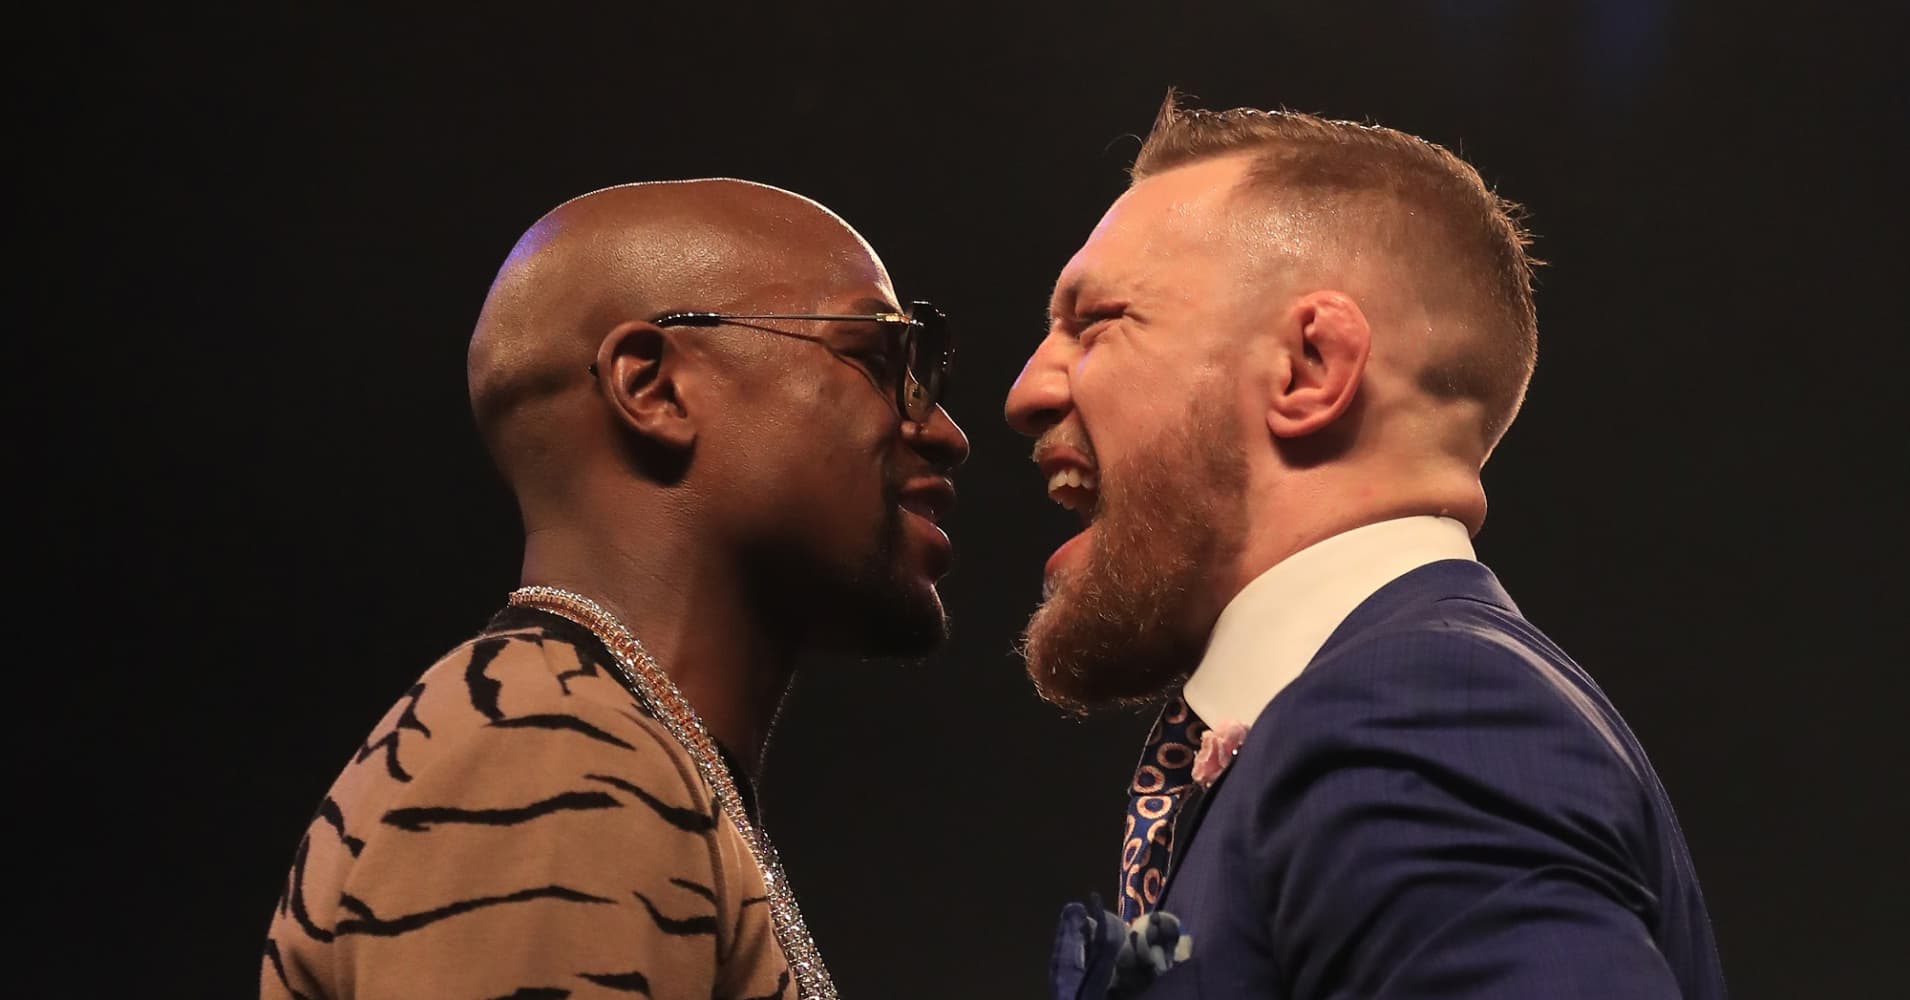 50 million could watch Mayweather-McGregor in the US alone